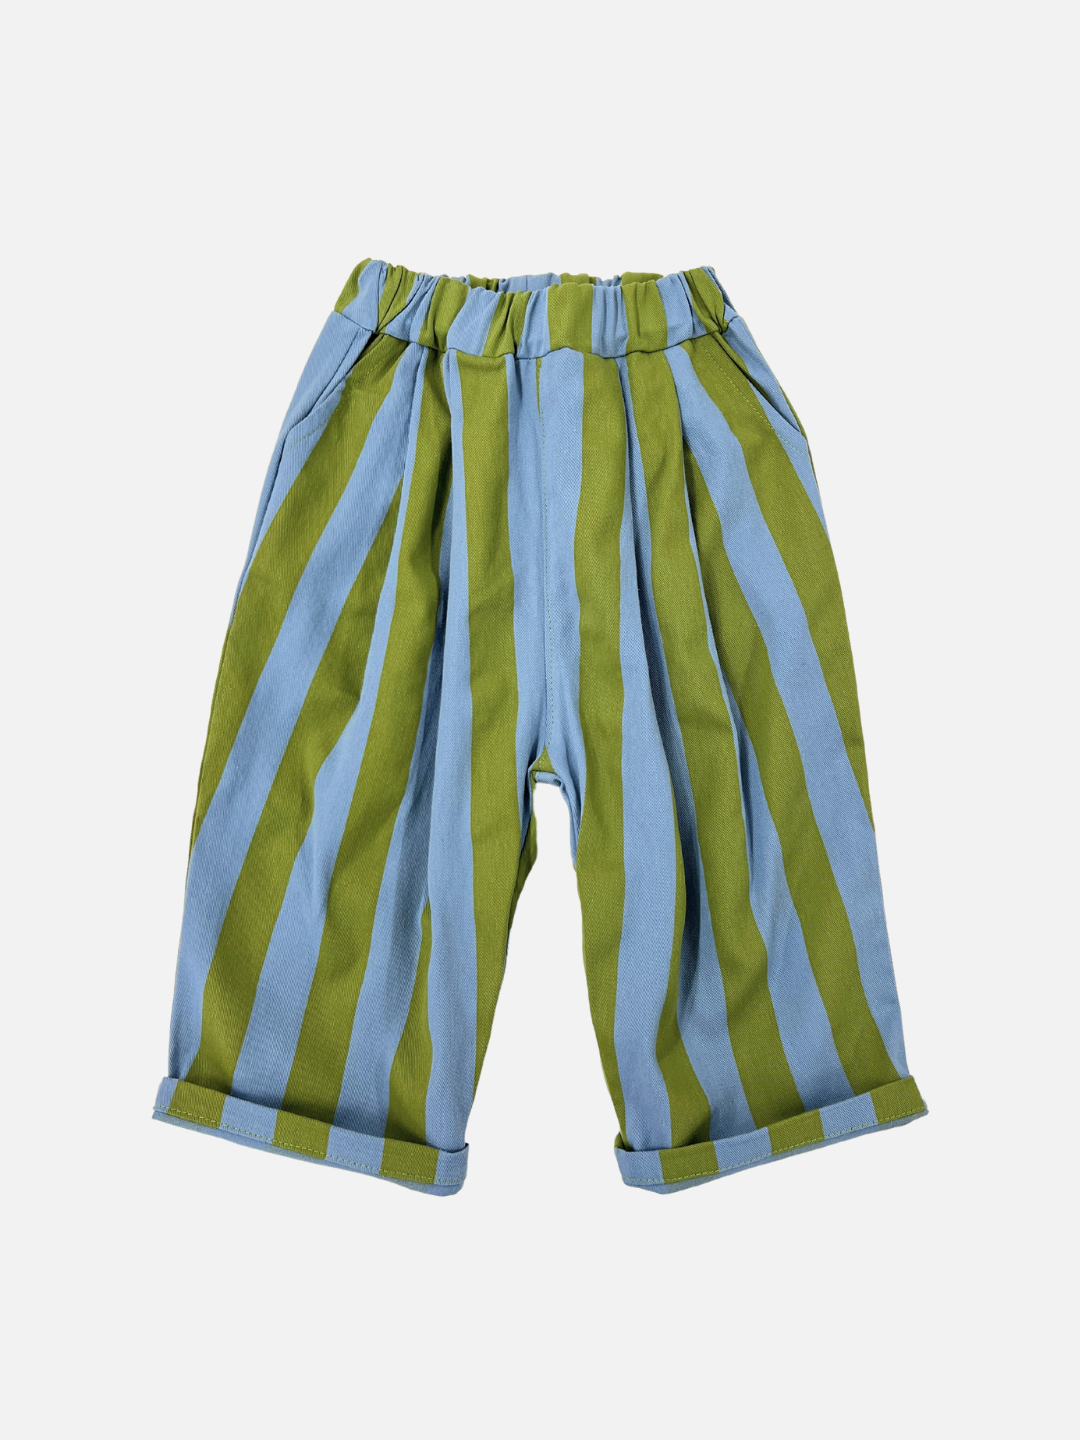 Front view of kids baggy pants in blue with wide green vertical stripes.